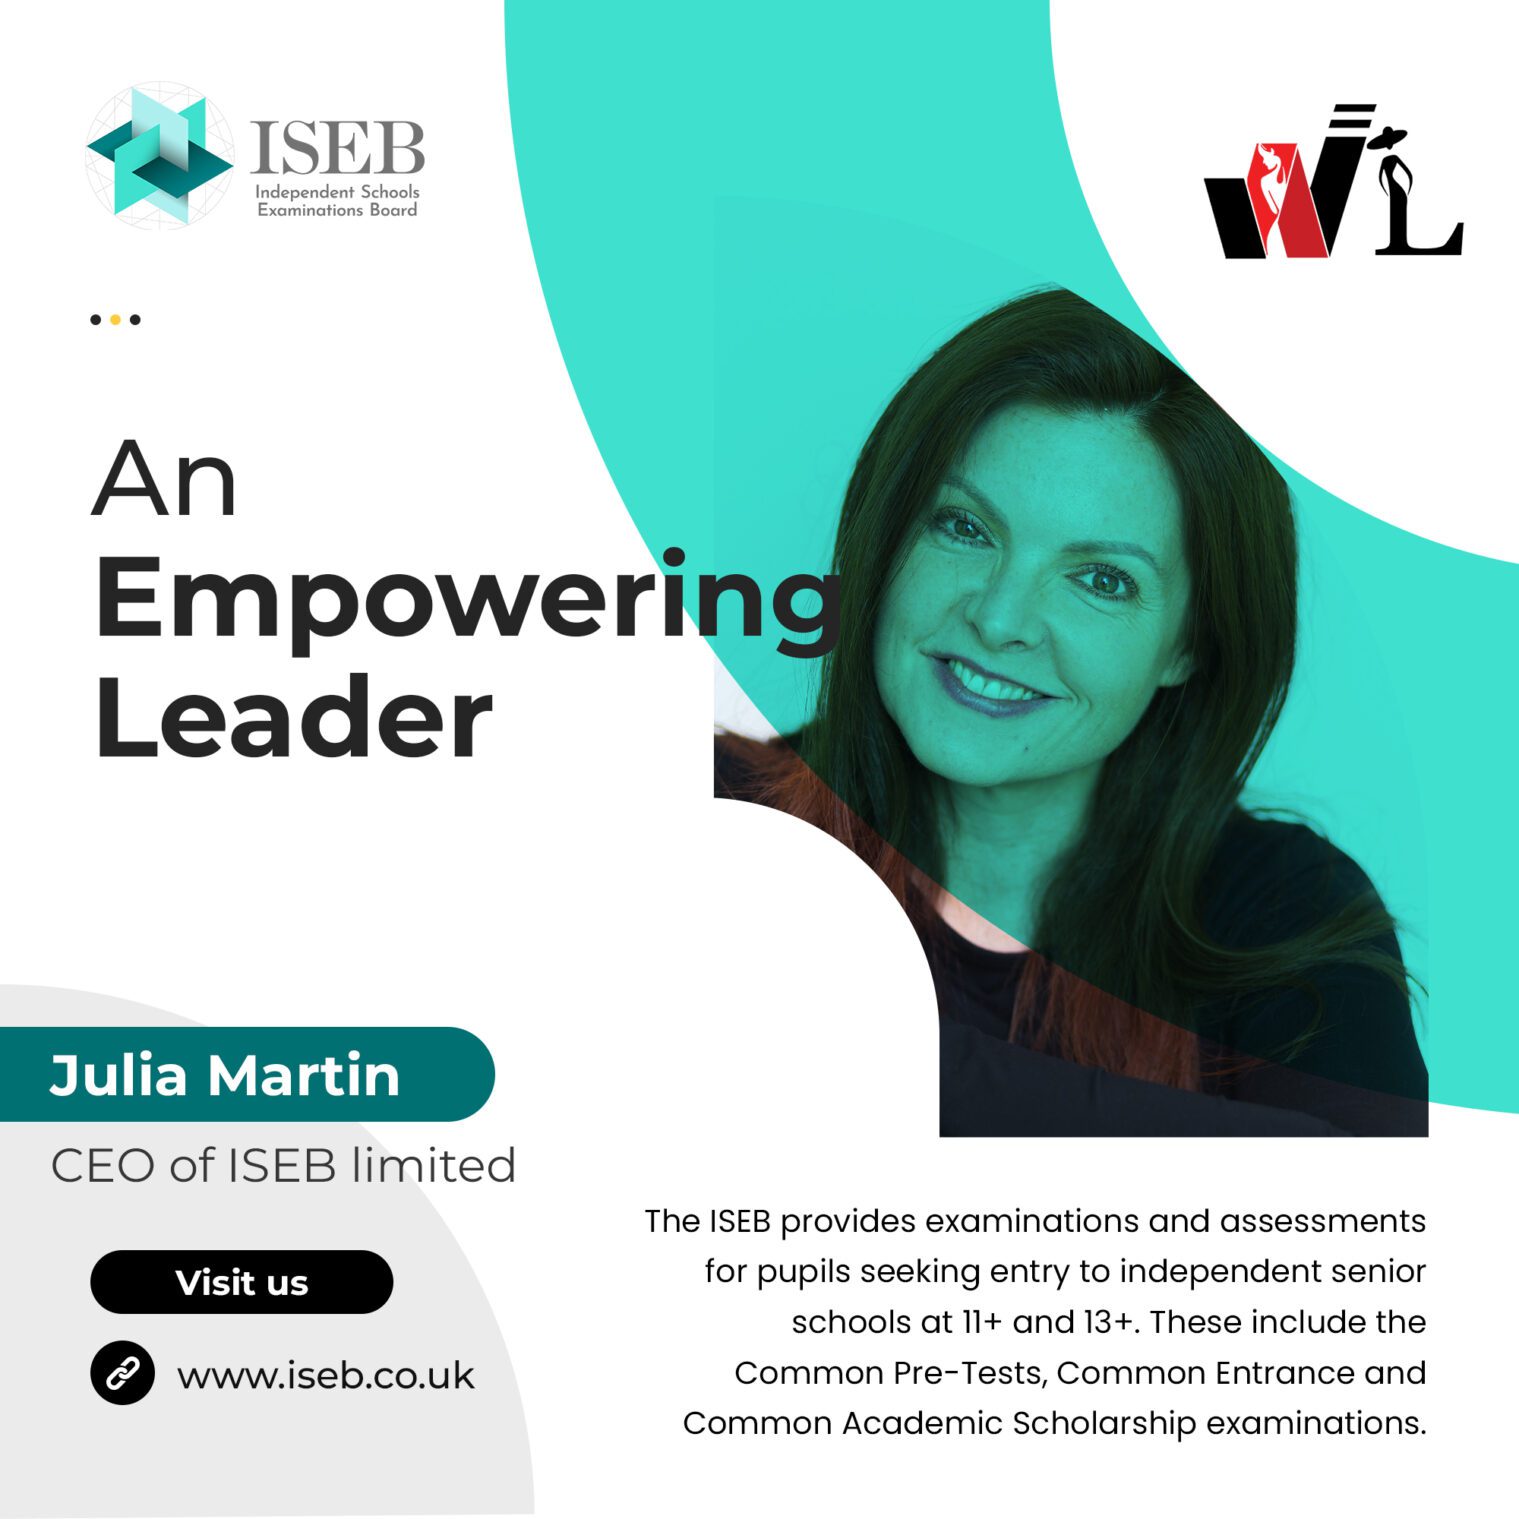 An Empowering Leader: a graphic featuring Julia Martin including the logos of ISEB and IERA